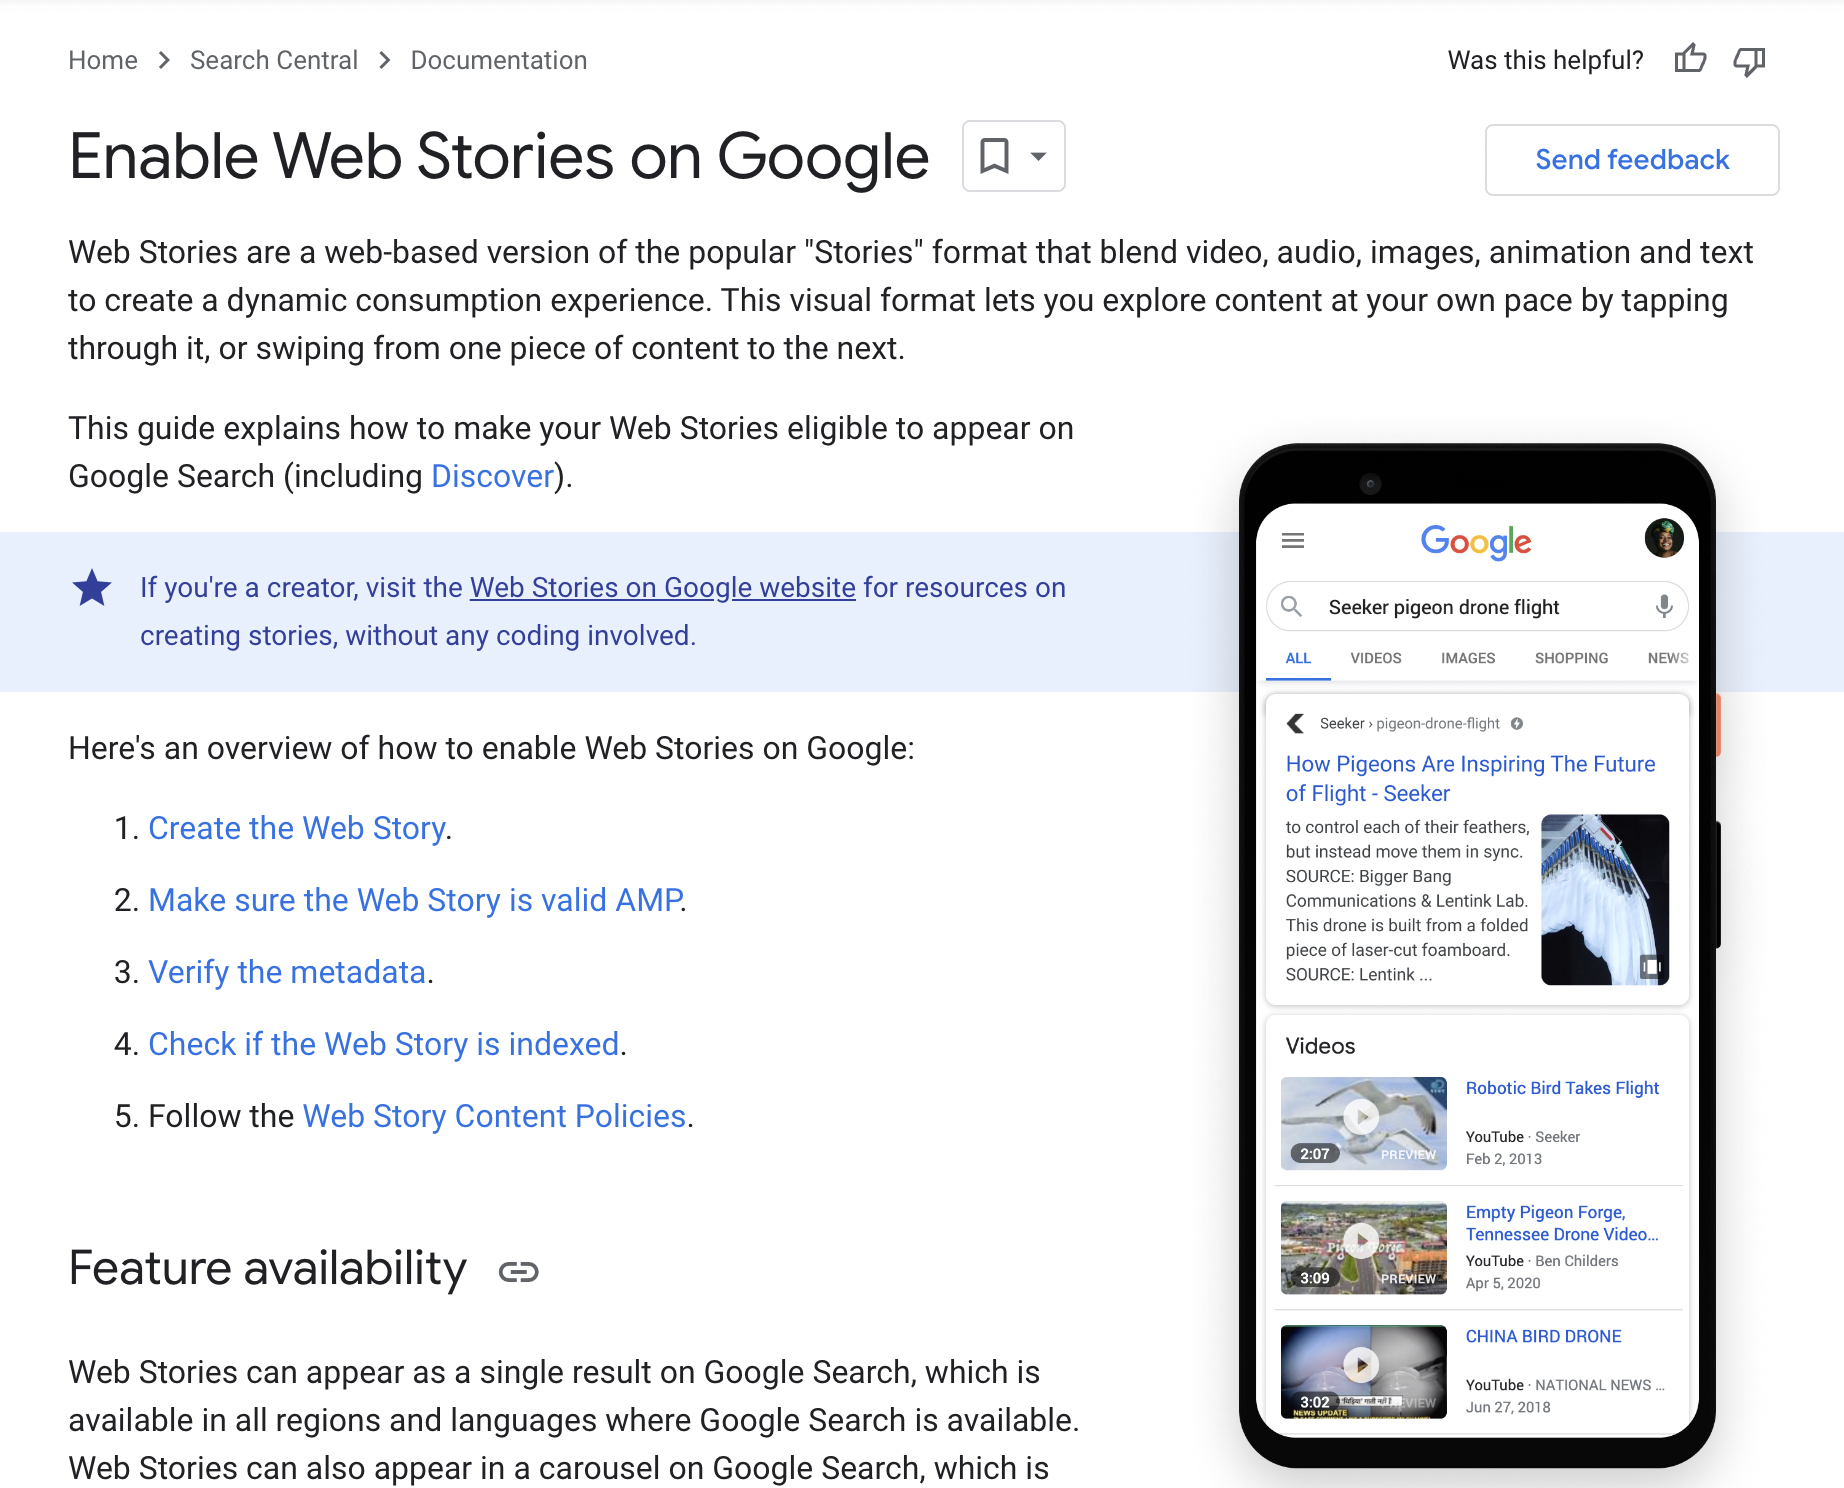 Updated the availability of Web Stories